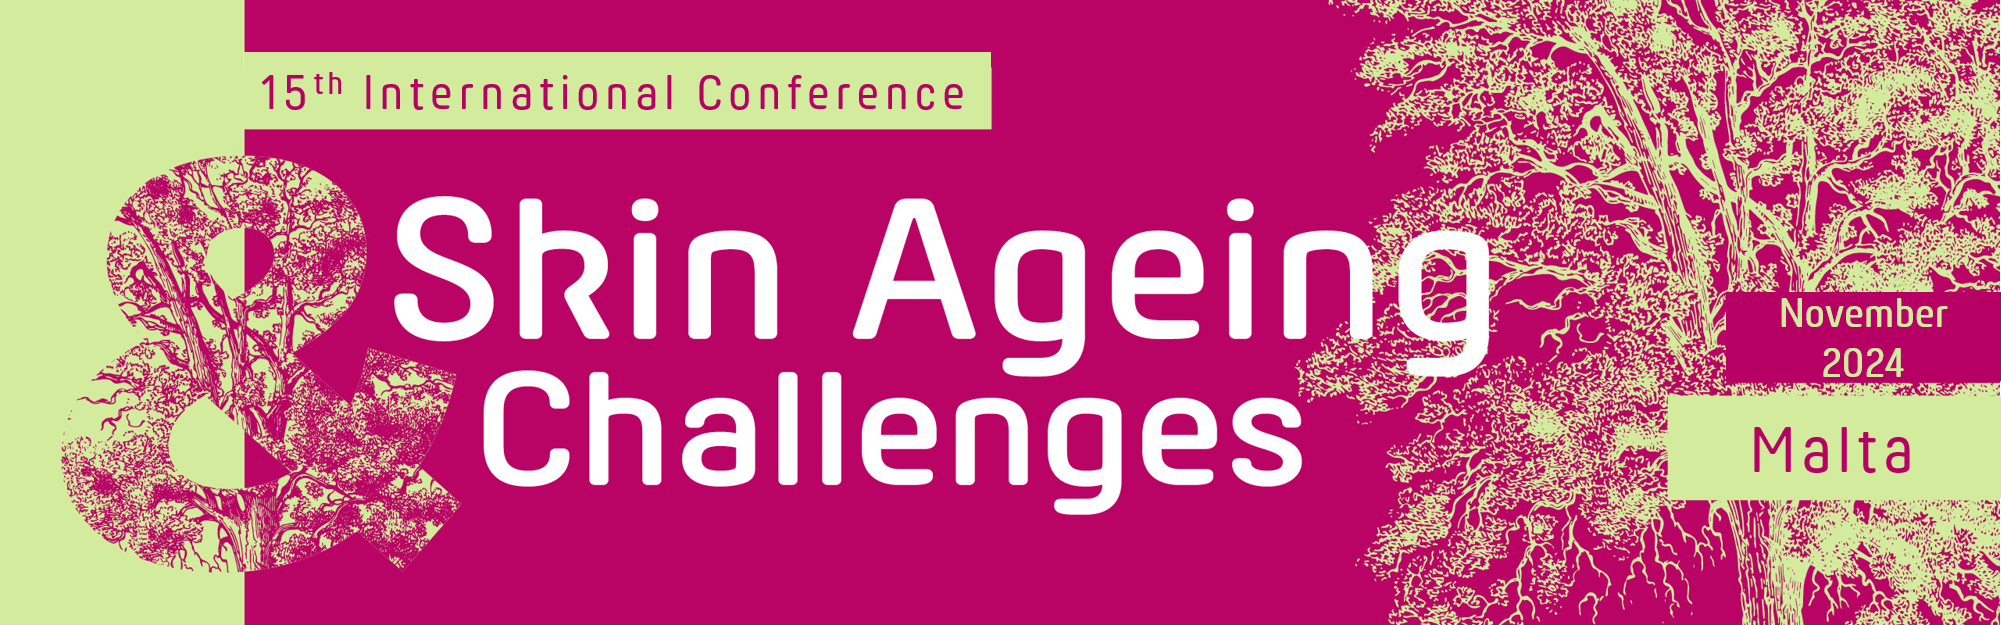 Skin Ageing & Challenges